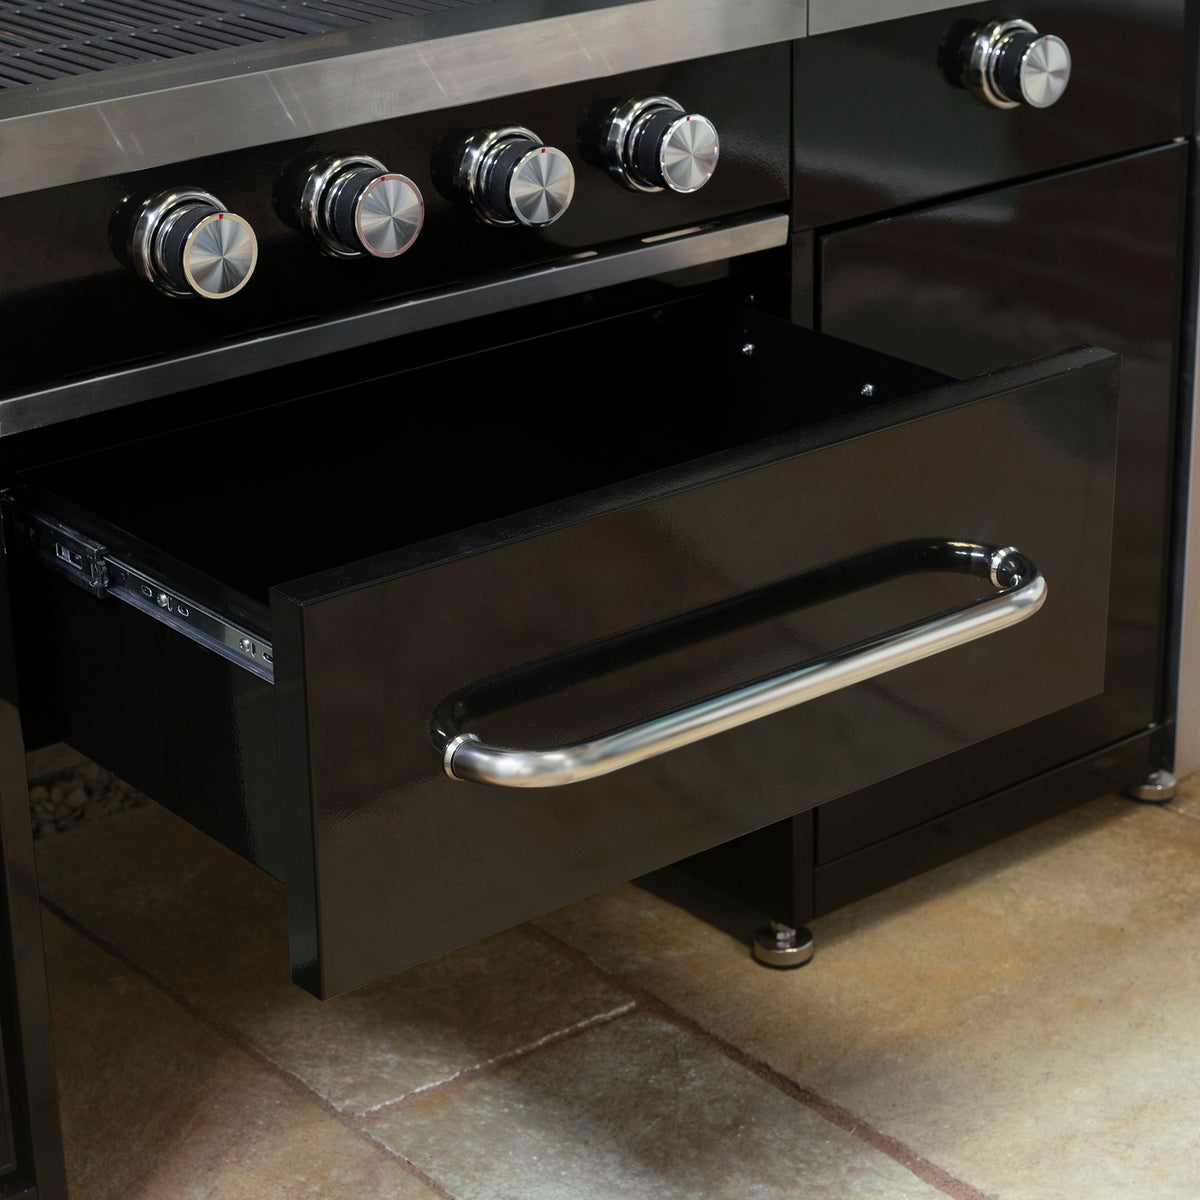 Draco Grills Black 4 Burner Gas Barbecue Outdoor Kitchen Island with Sink and Side Burner